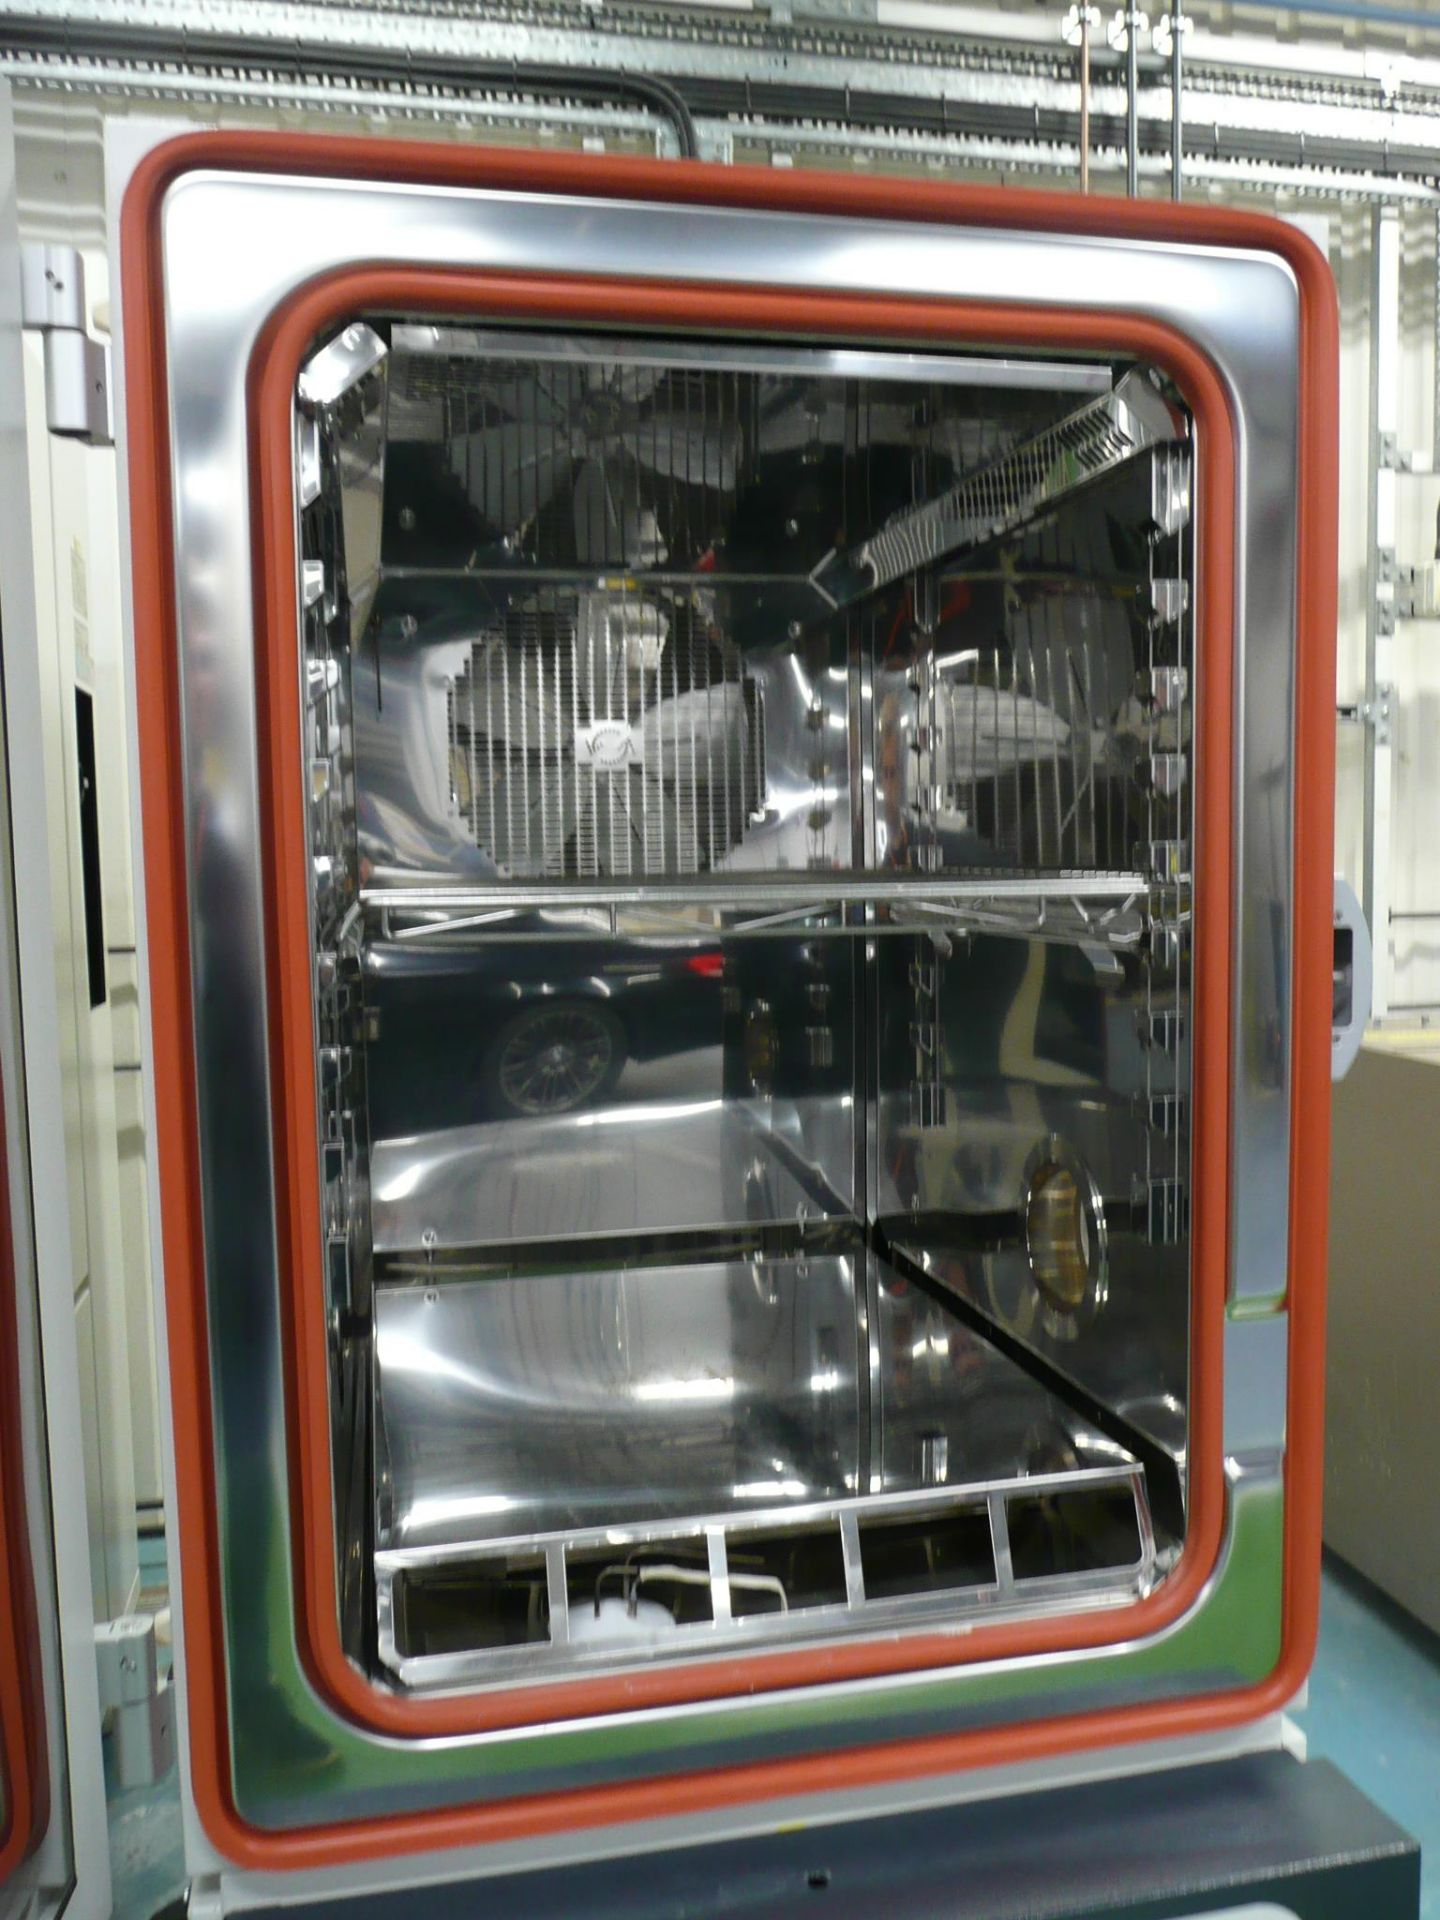 Weiss Technik Gallenkamp, C340-70 temperature and climatic thermo cycle chamber (USED FOR ONE YEAR) - Image 2 of 3